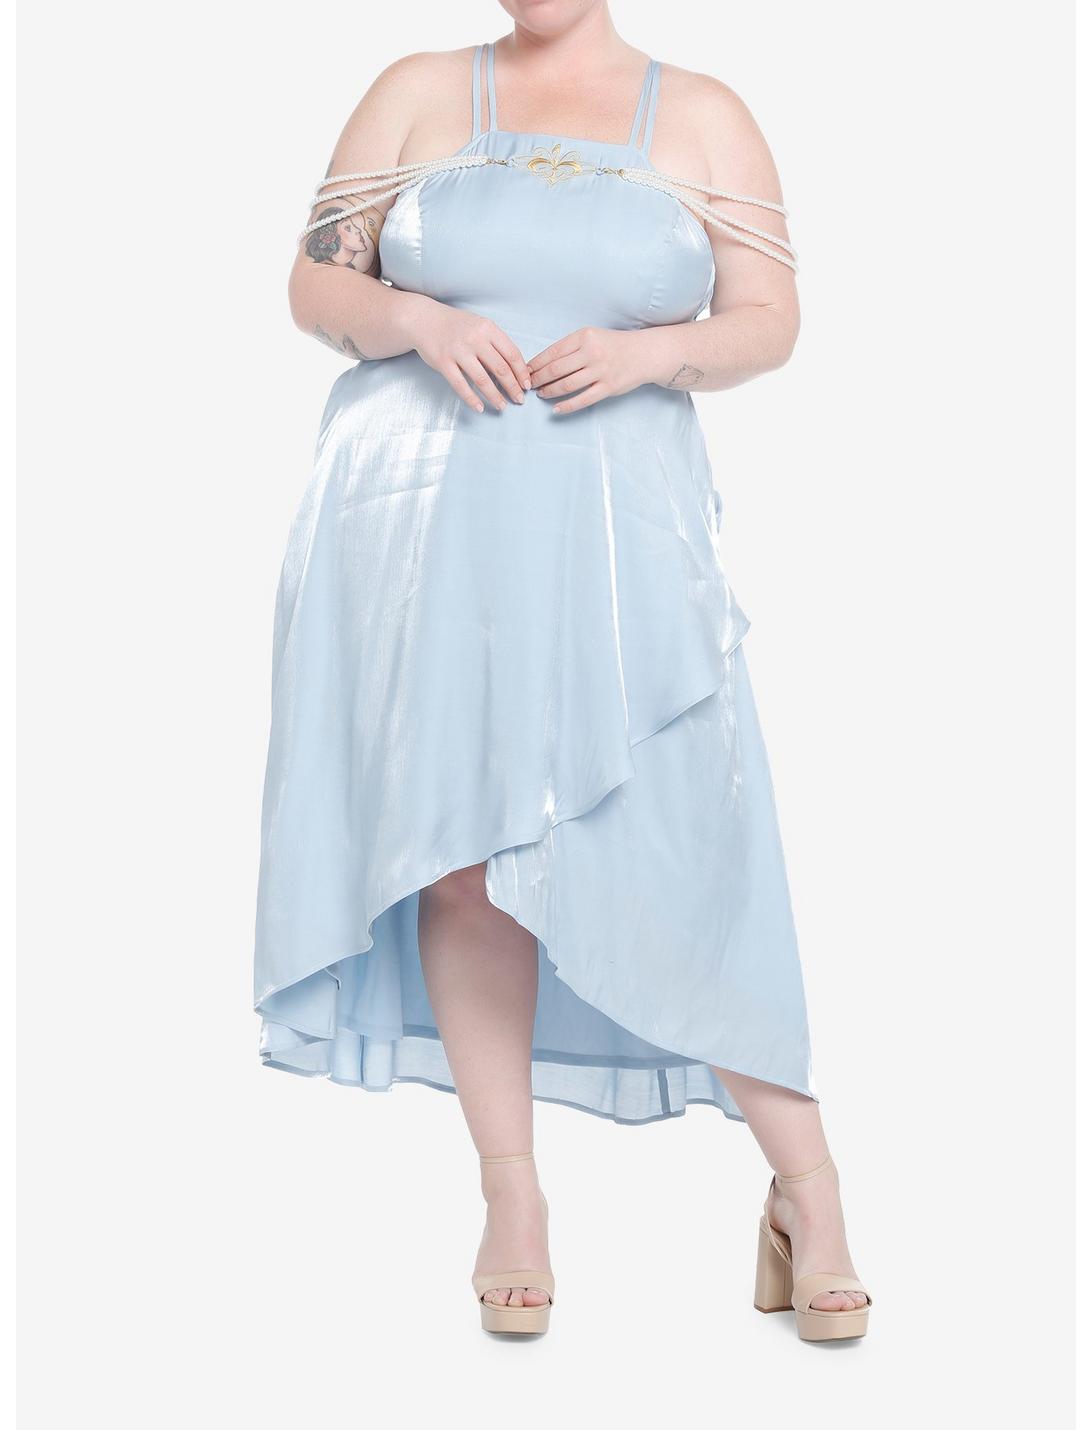 Her Universe Star Wars Padme Pearl Strap Dress Plus Size Her Universe Exclusive, LIGHT BLUE, hi-res